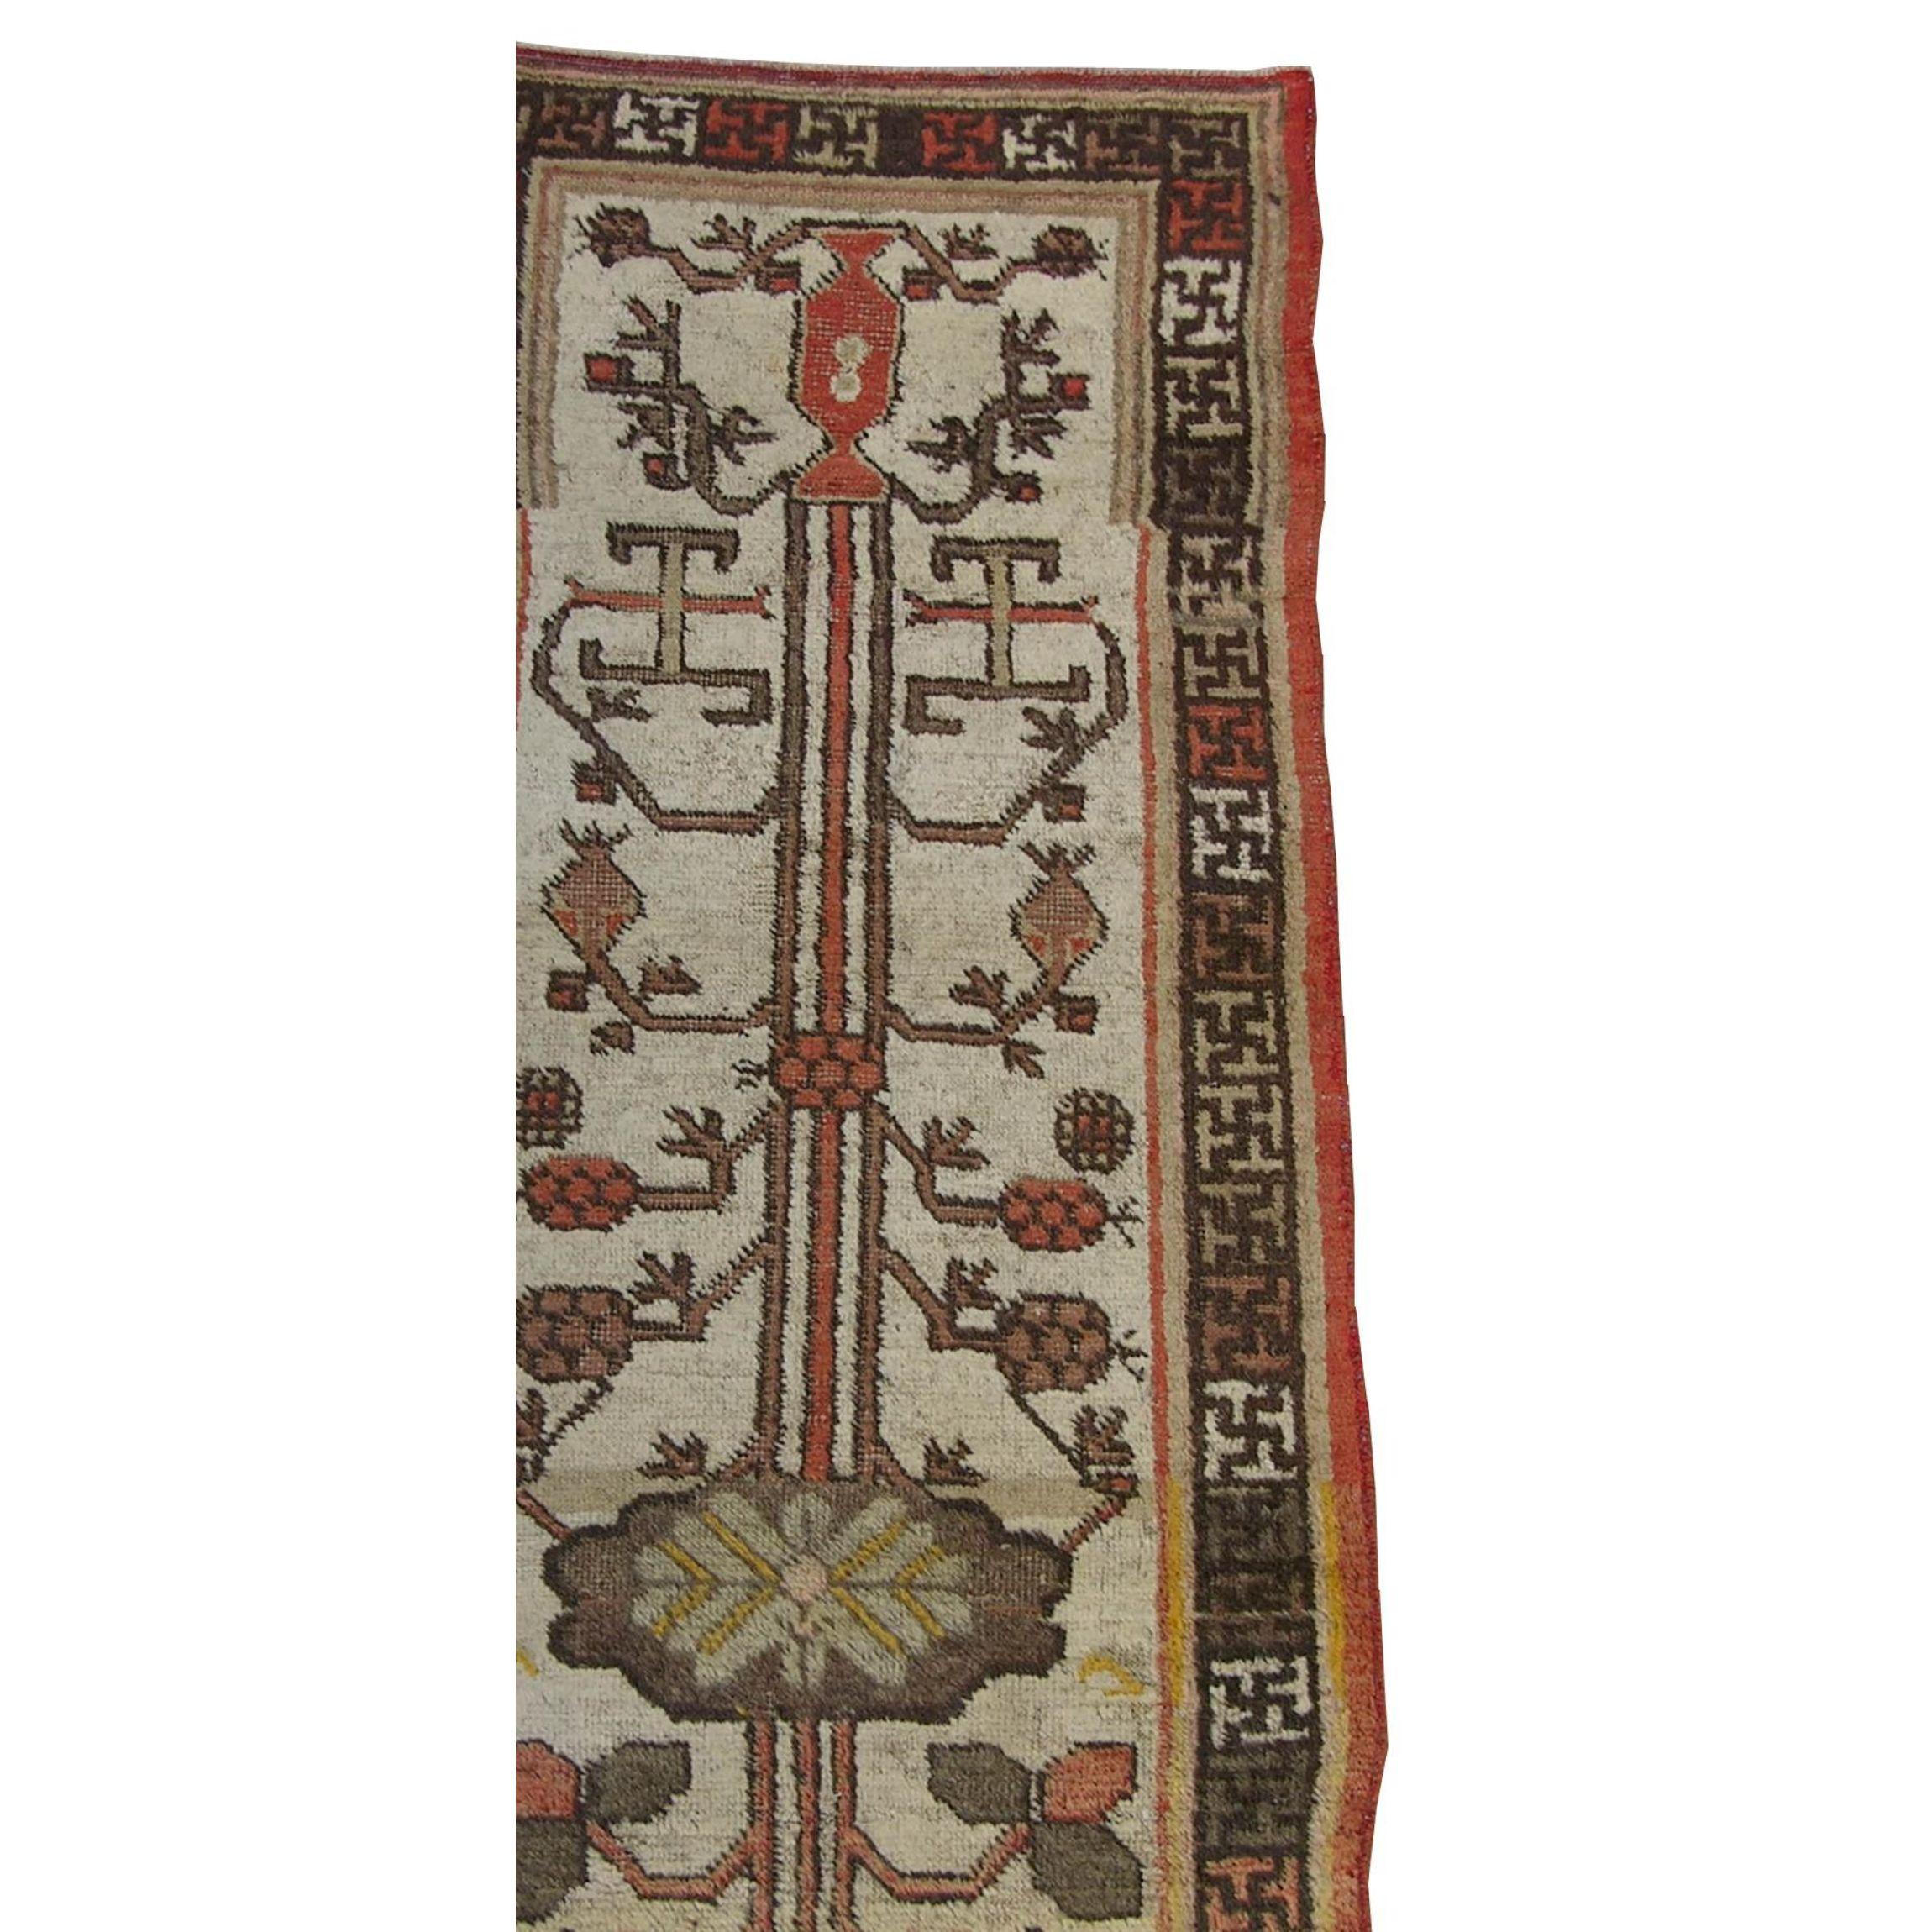 Early-19th Century Uzbek Khotan Samarkand Rug 2'3'' X 5'9'', tribal and traditional, wool on cotton foundation, bronze, brown, beige color